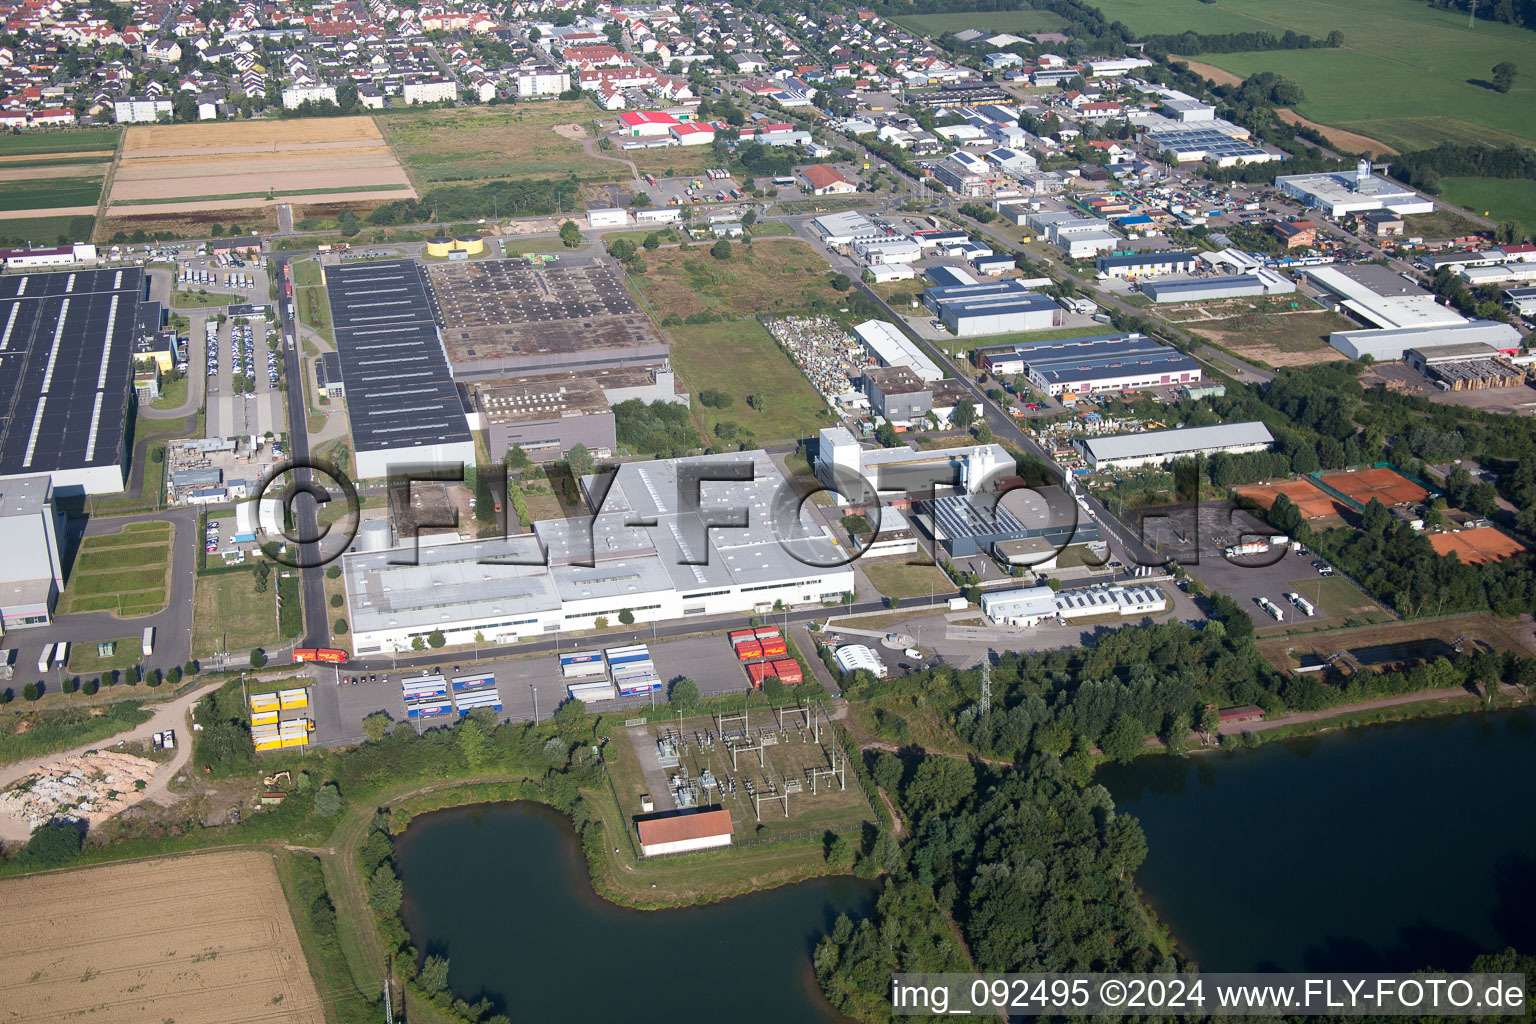 Industrial Estate in Offenbach an der Queich in the state Rhineland-Palatinate, Germany from the plane